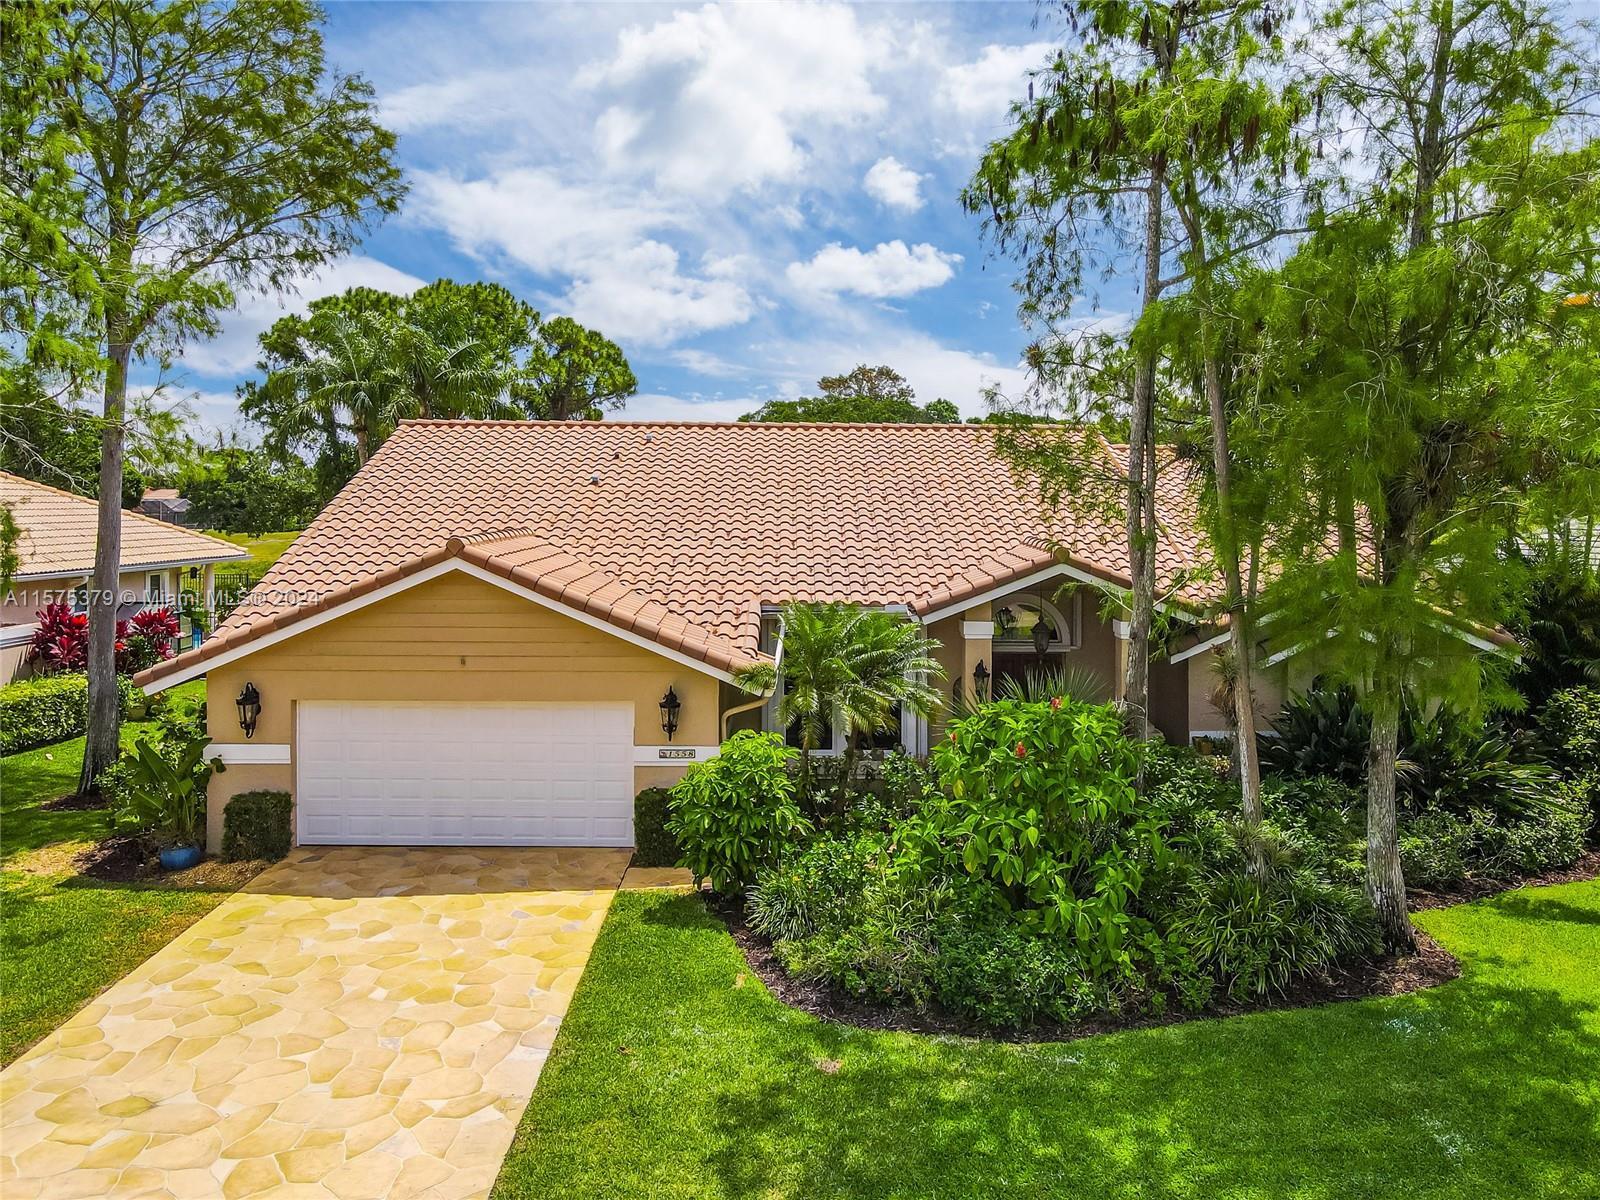 A desirable equestrian community in Greenview Shores. Featuring 4 bedrooms, 2.5 bathrooms, two car g